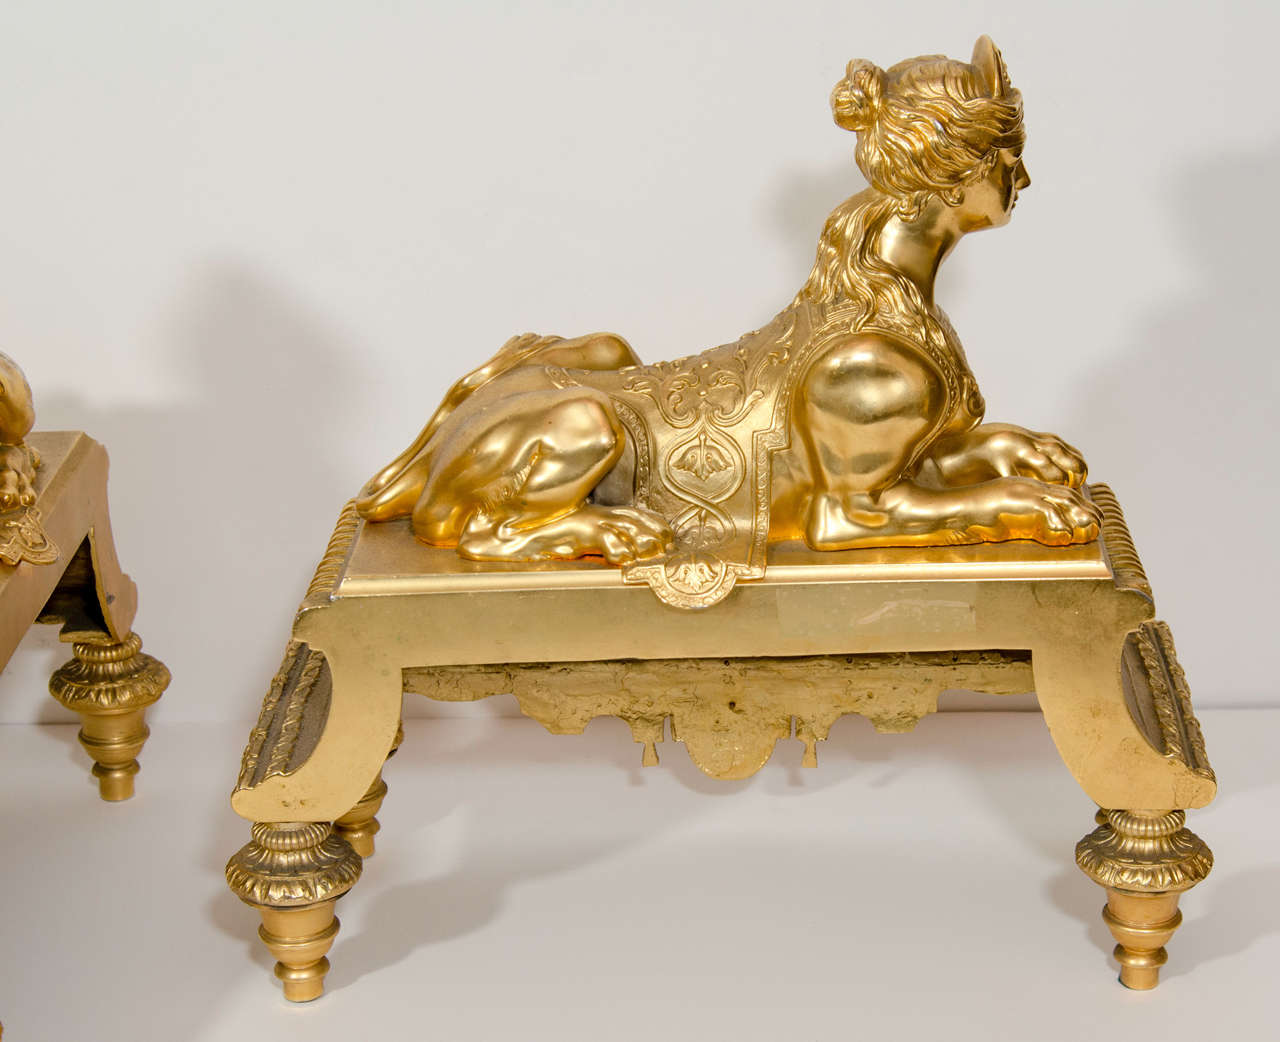 Pair of Rare & Large Antique French Louis XVI Gilt Bronze Figural Andirons, 19th Century For Sale 2